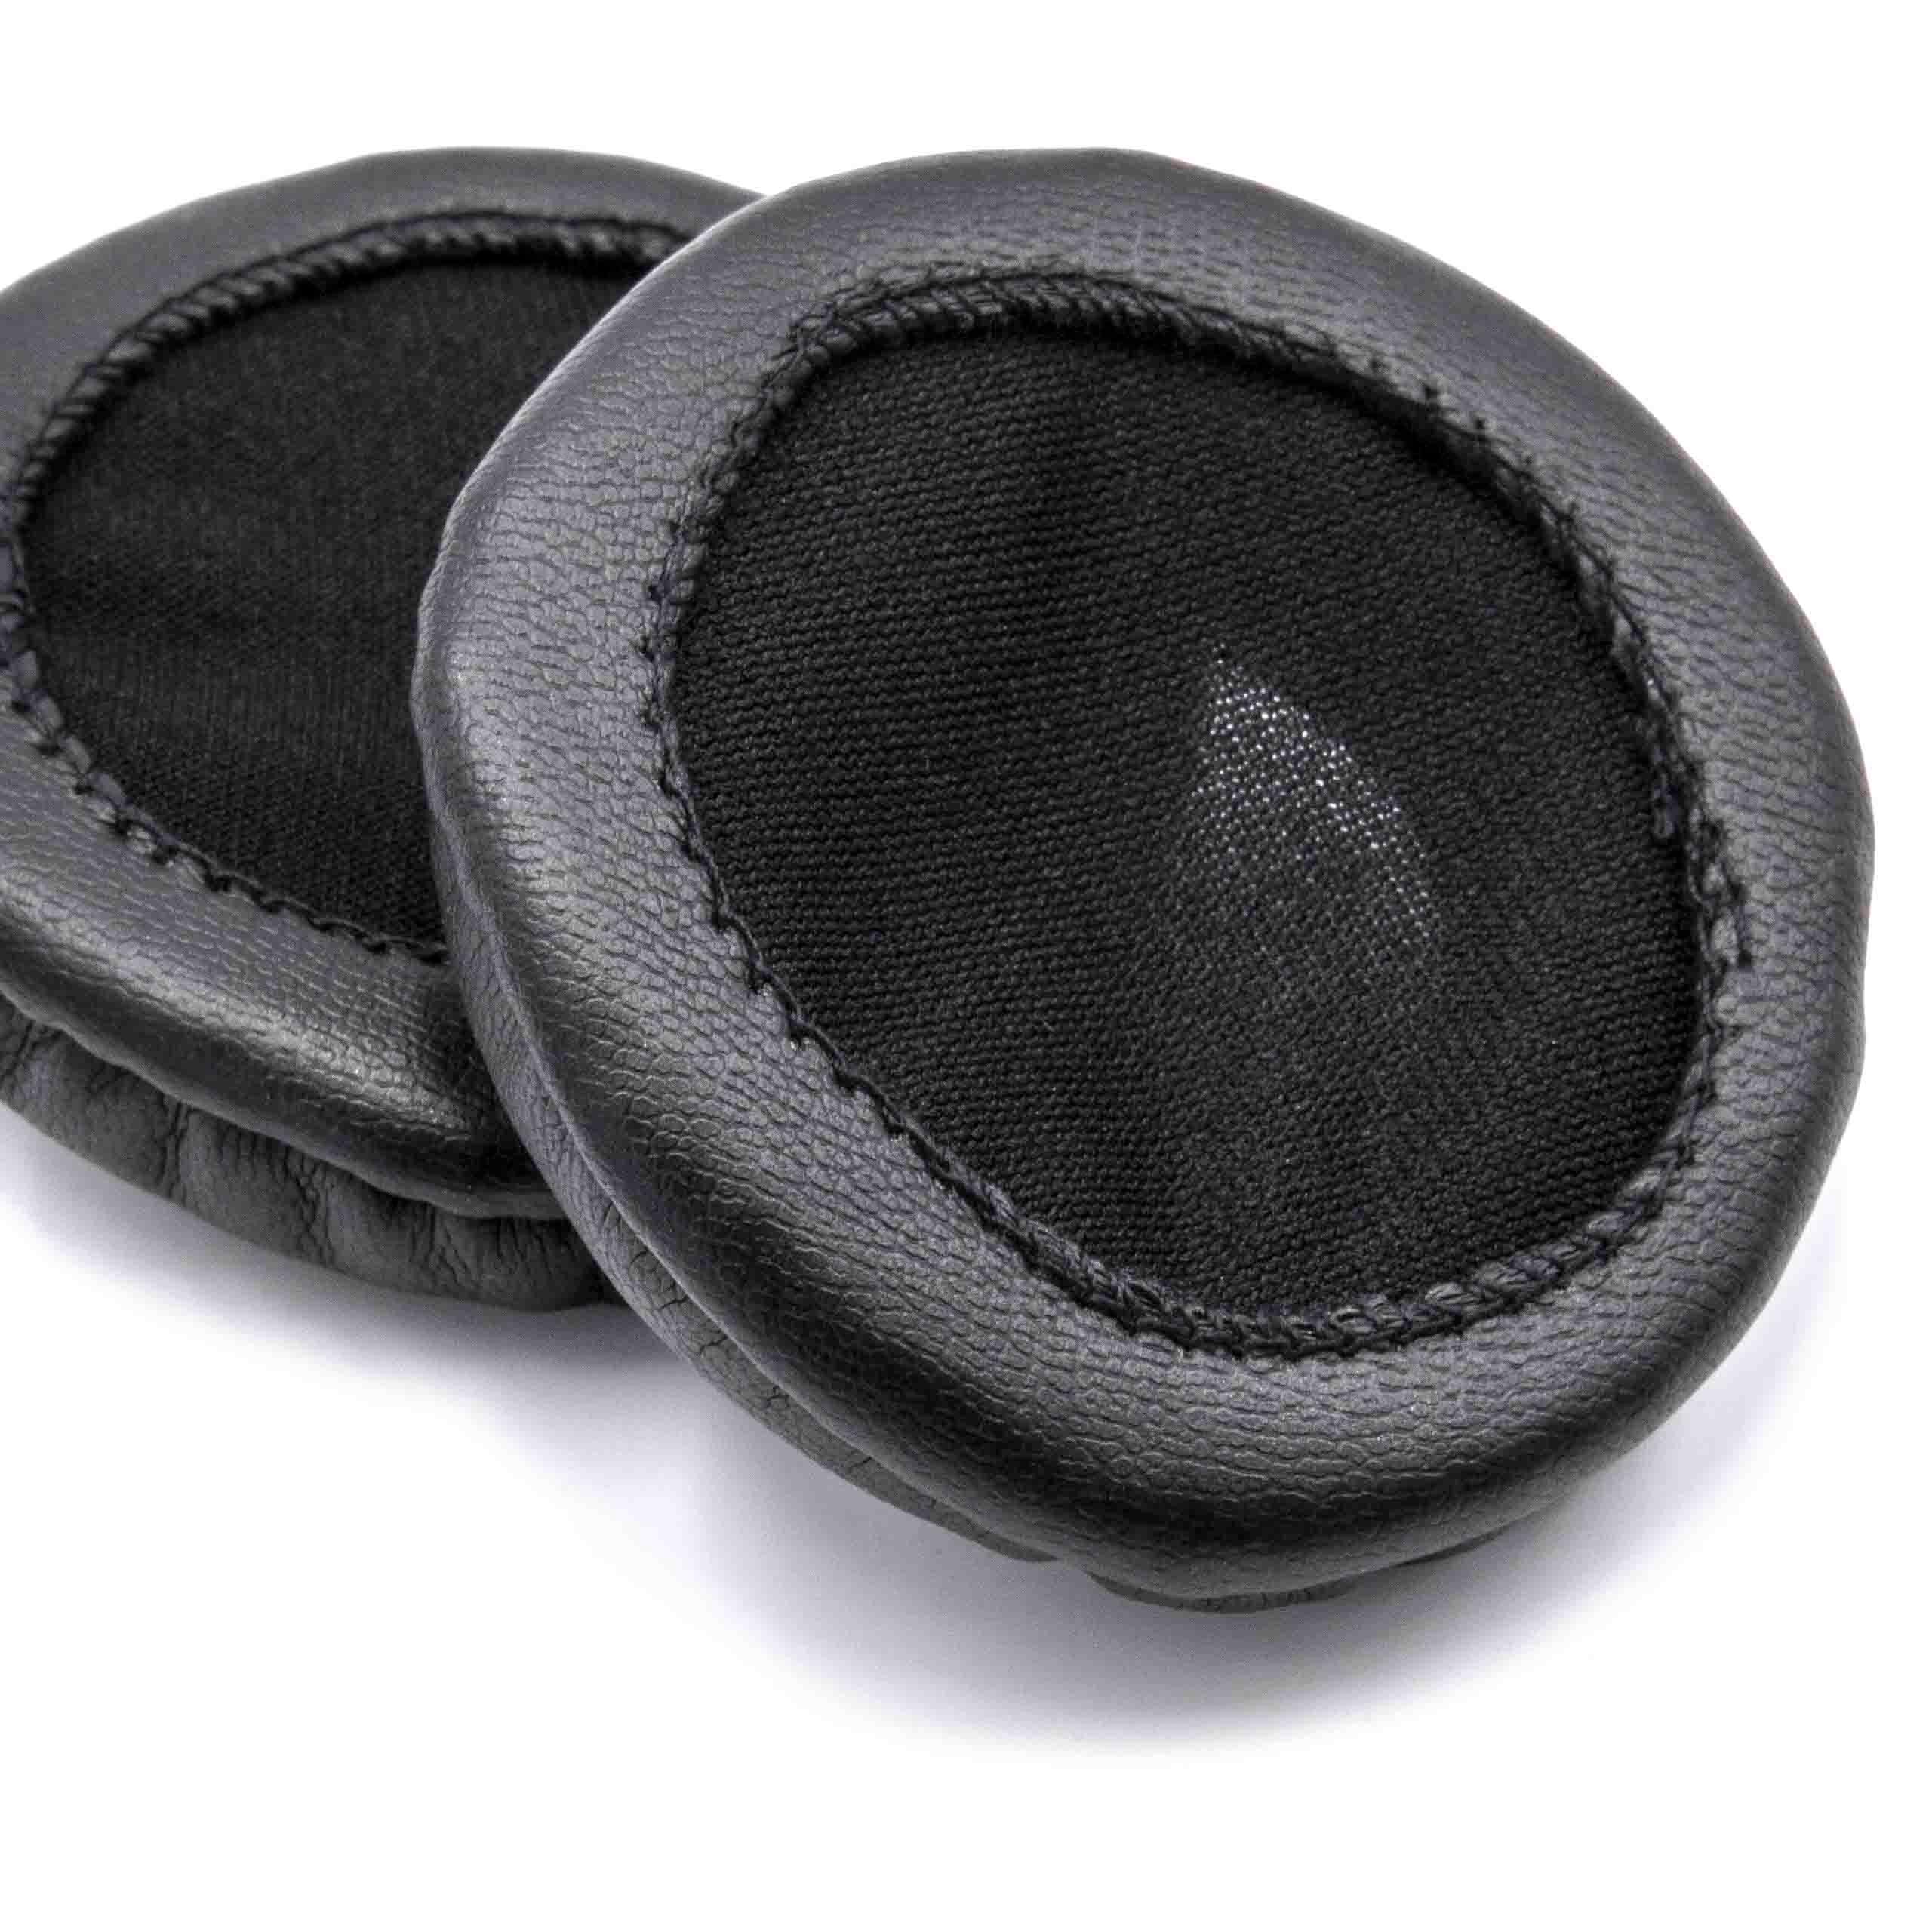 2x Ear Pads suitable for ATH / headphones which require 60mm ear pads / Sony ES55 Headphones etc. - polyuretha